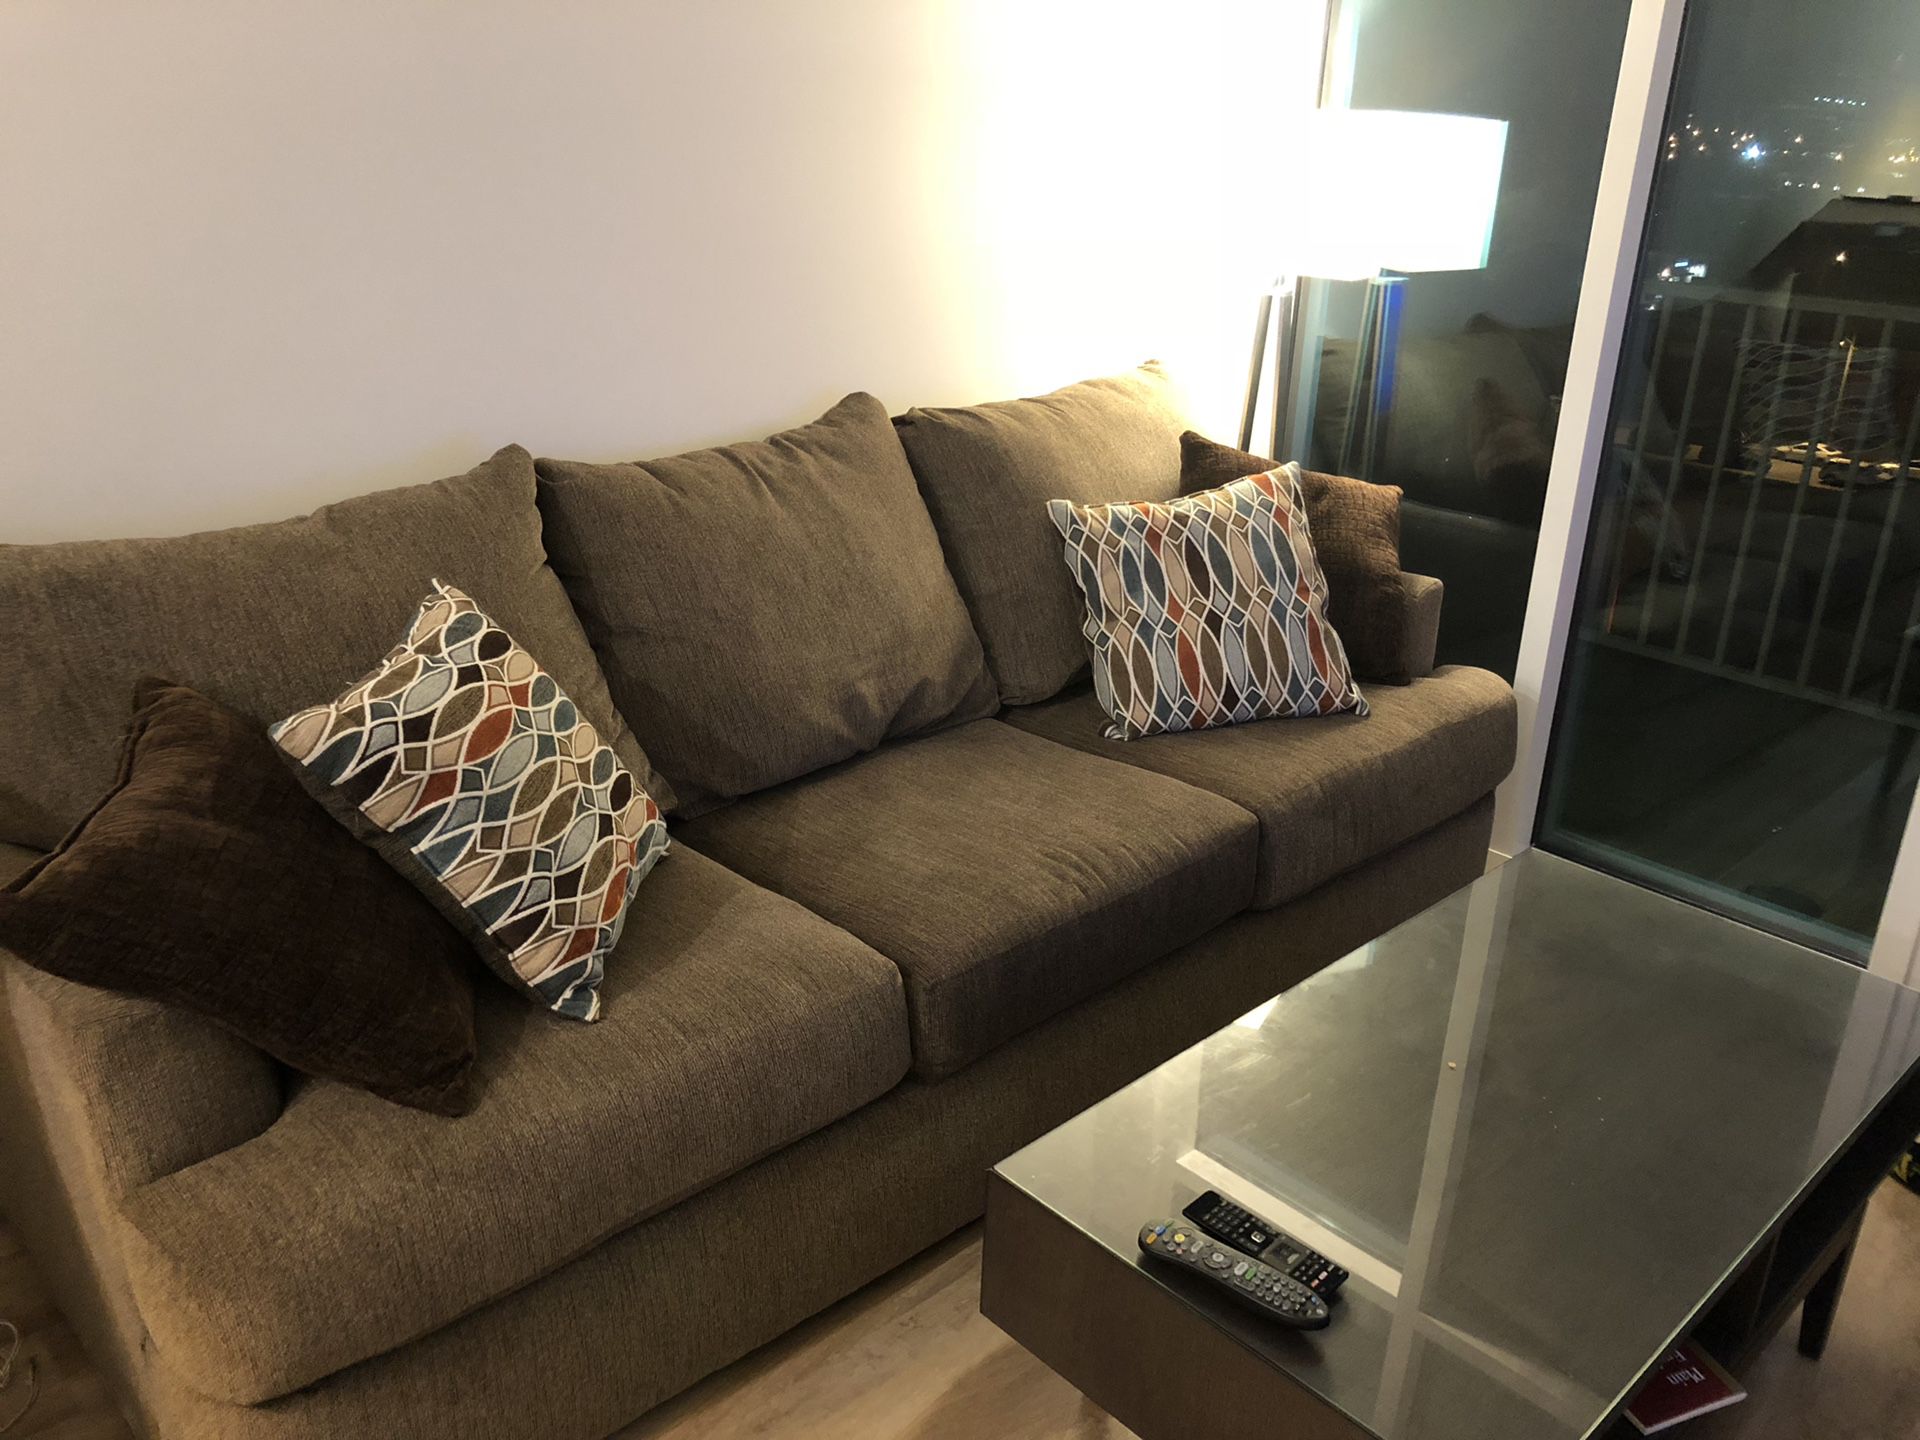 CAN DELIVER TUESDAY ONLY - Nearly New Couch